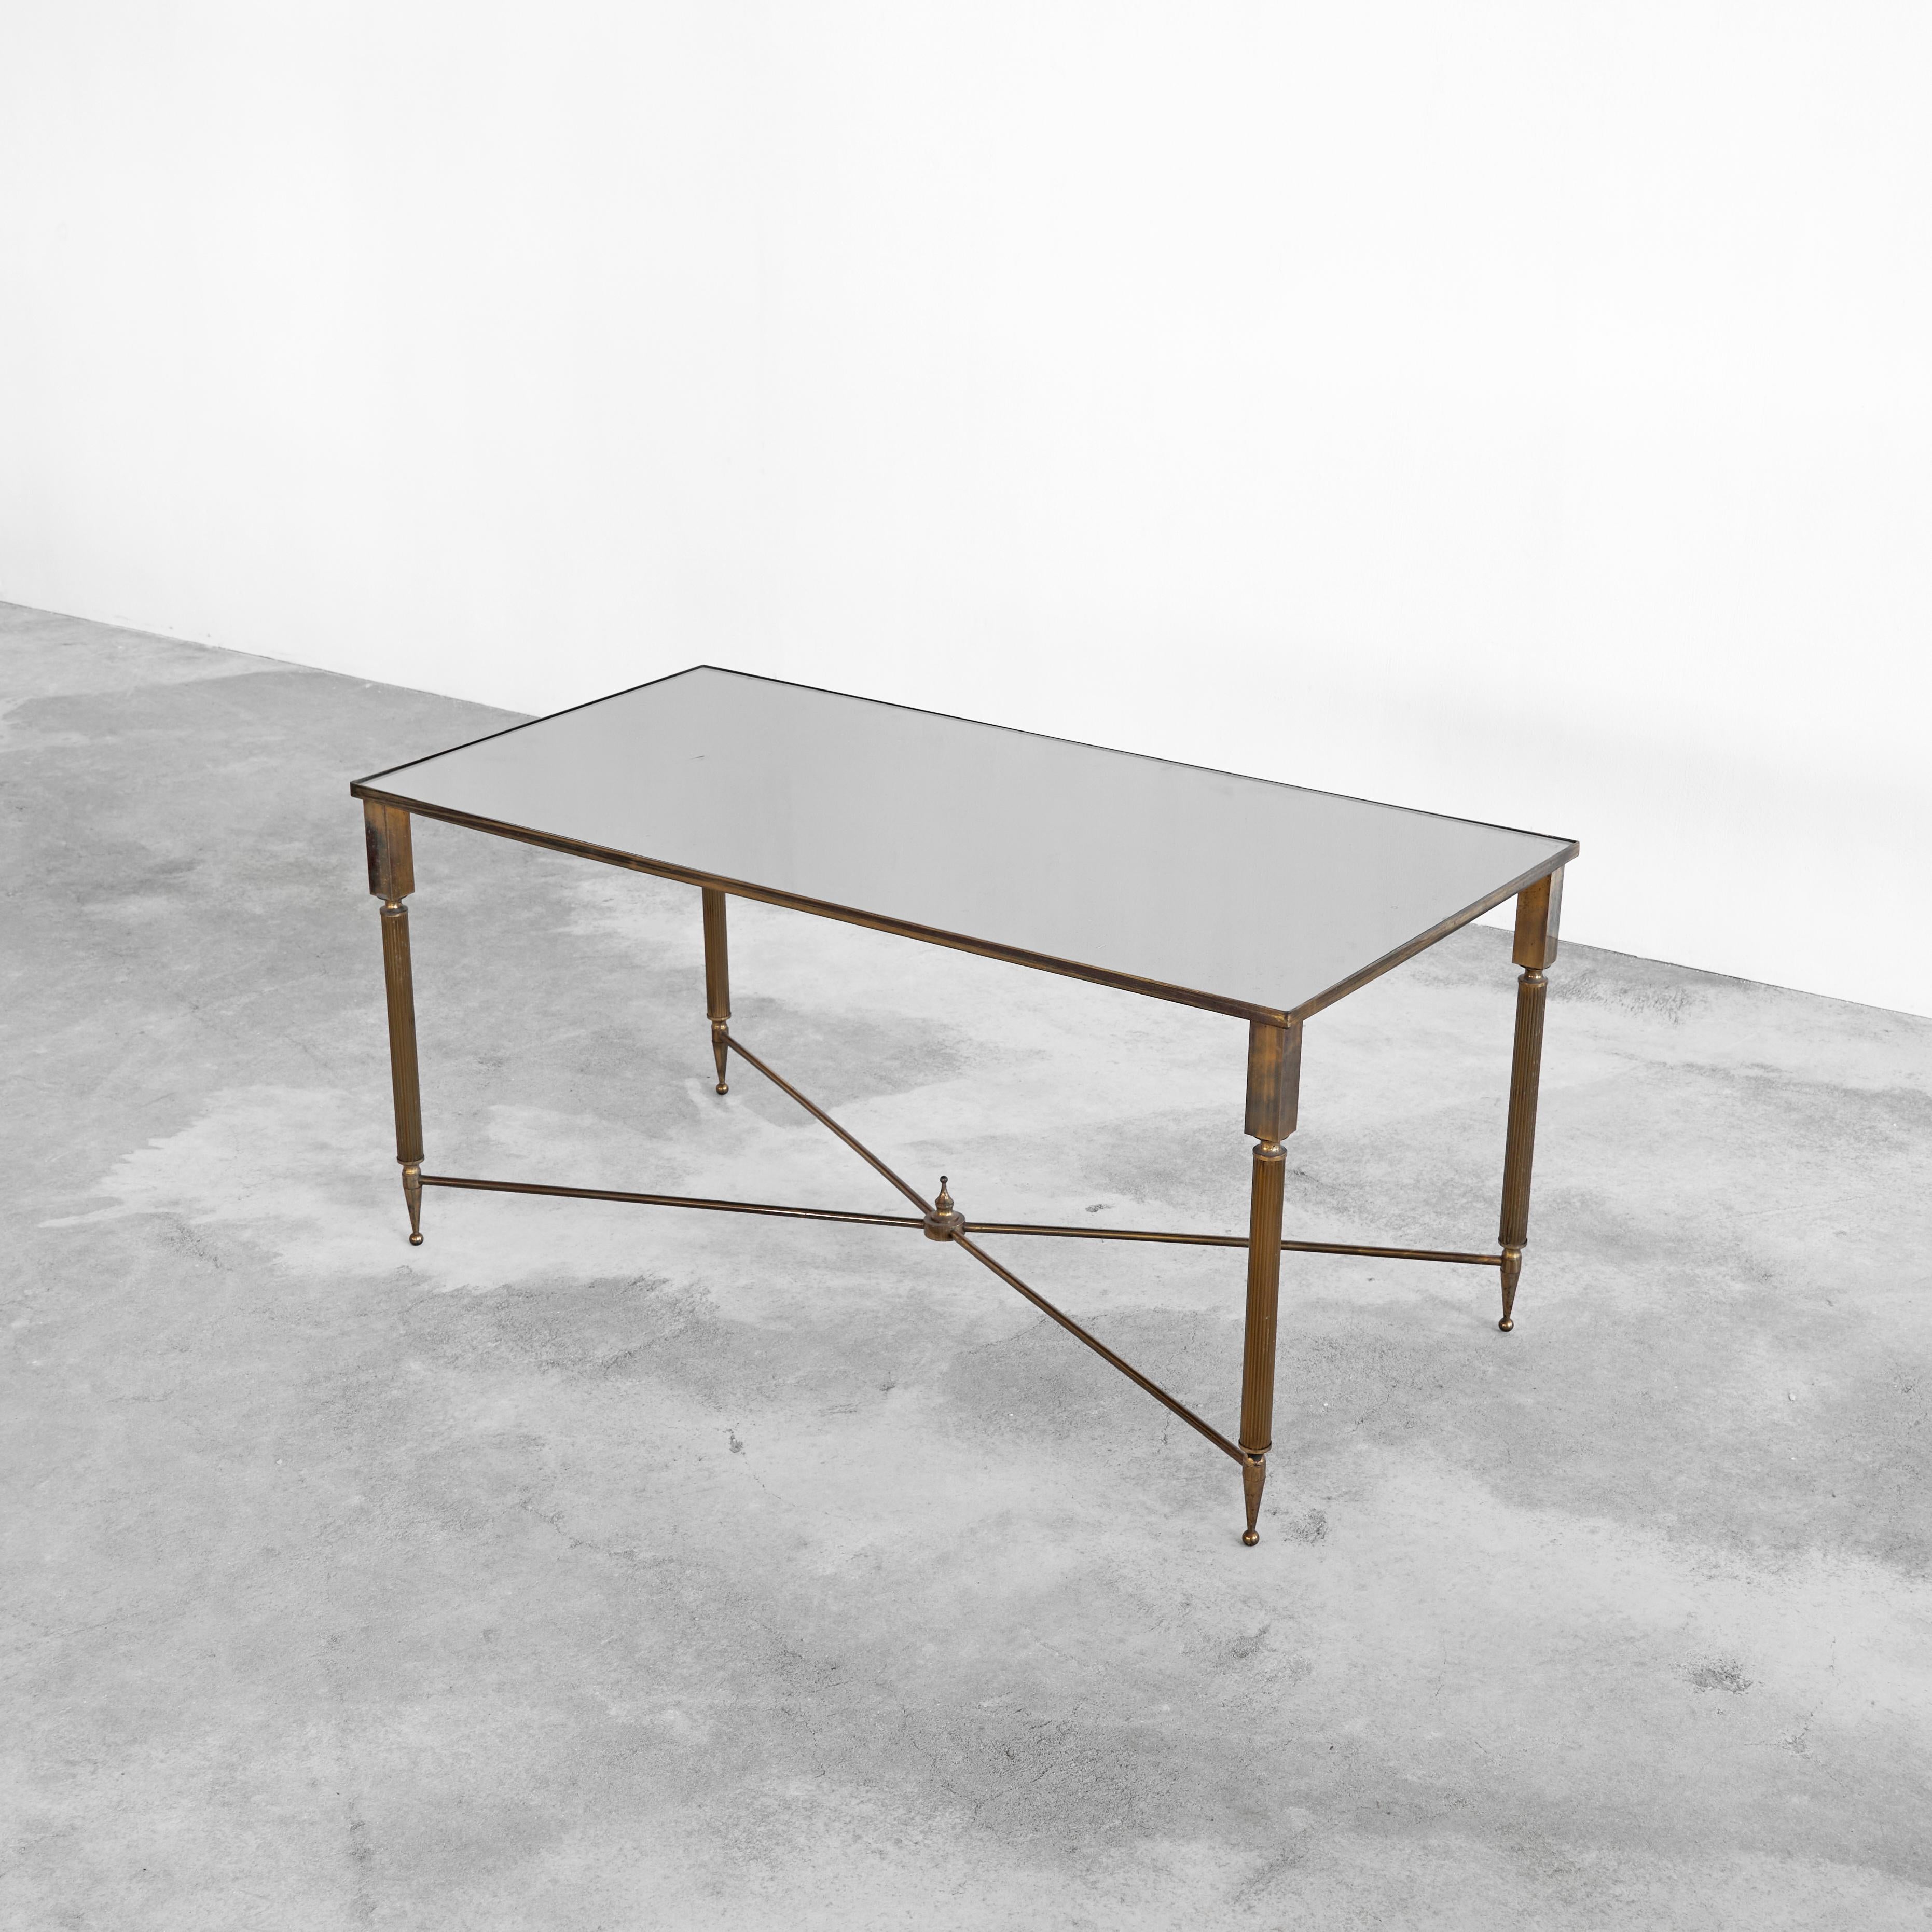 Maison Charles Coffee Table in Patinated Brass and Mirror Glass, France, 1960s.

Beautiful coffee table in patinated brass and mirror glass. Wonderful contrast between the slender thin brass legs and edges and the bulky elements at the top of the